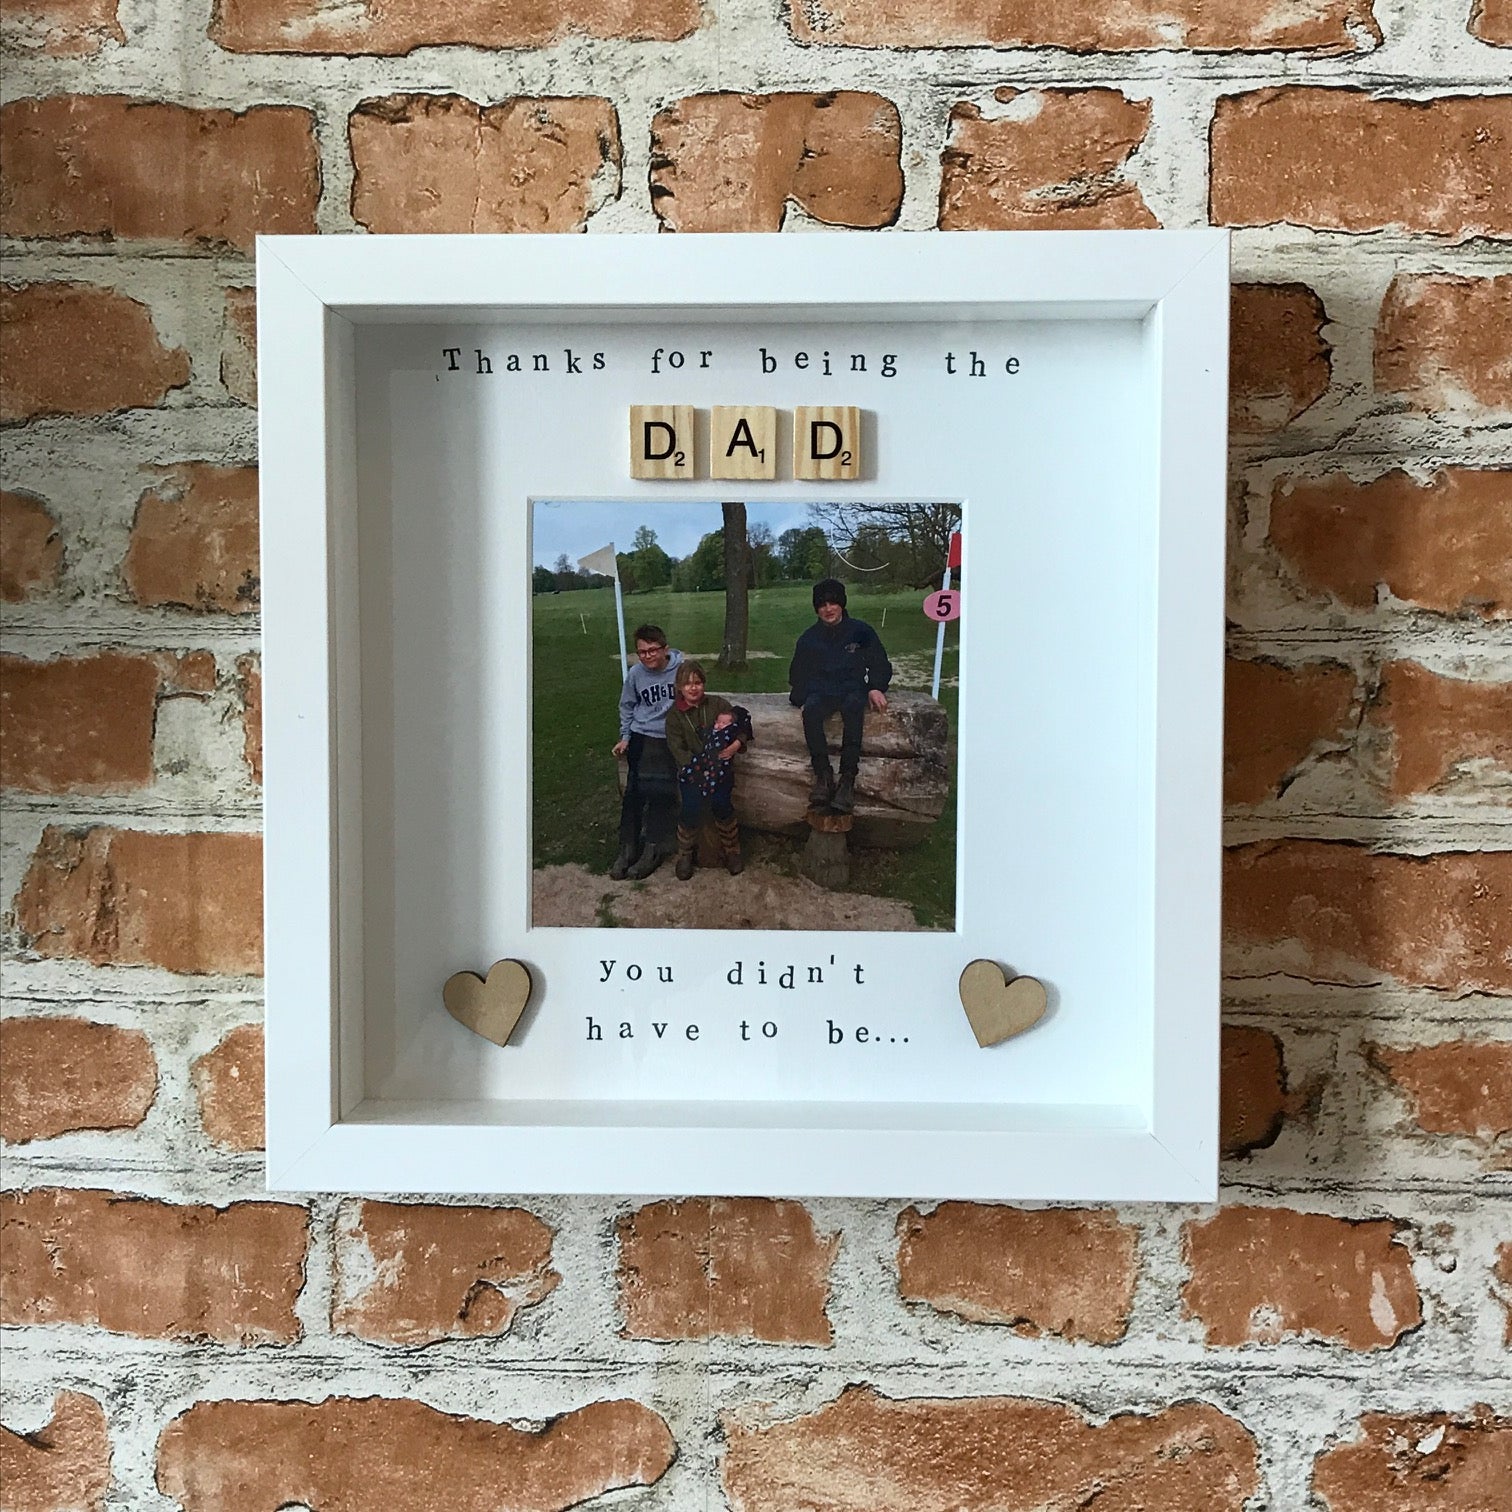 Thanks for being the Dad you didn't have to be - Step Dad Photo Frame from The Wrong End of Town